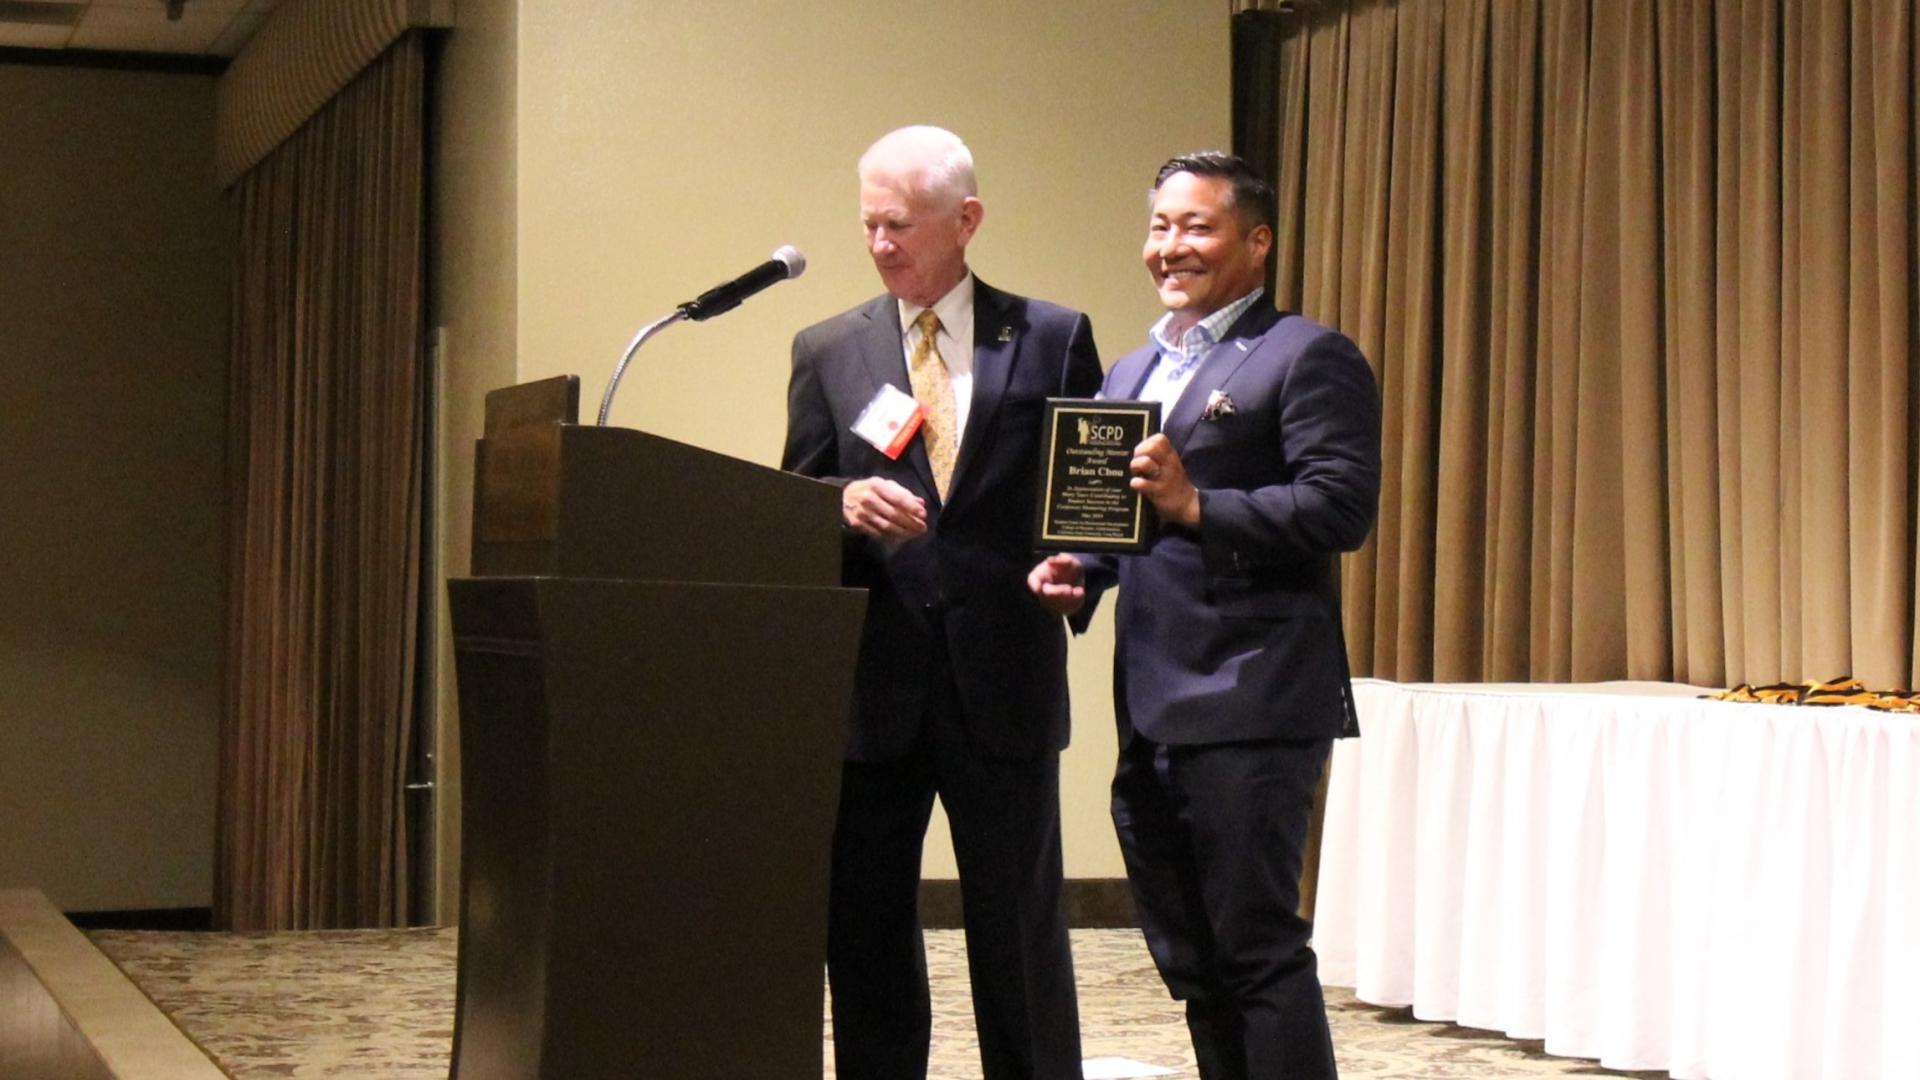 Mentor of the Year (Pictured Left to Right: Howard Fletcher, Brian Chou)